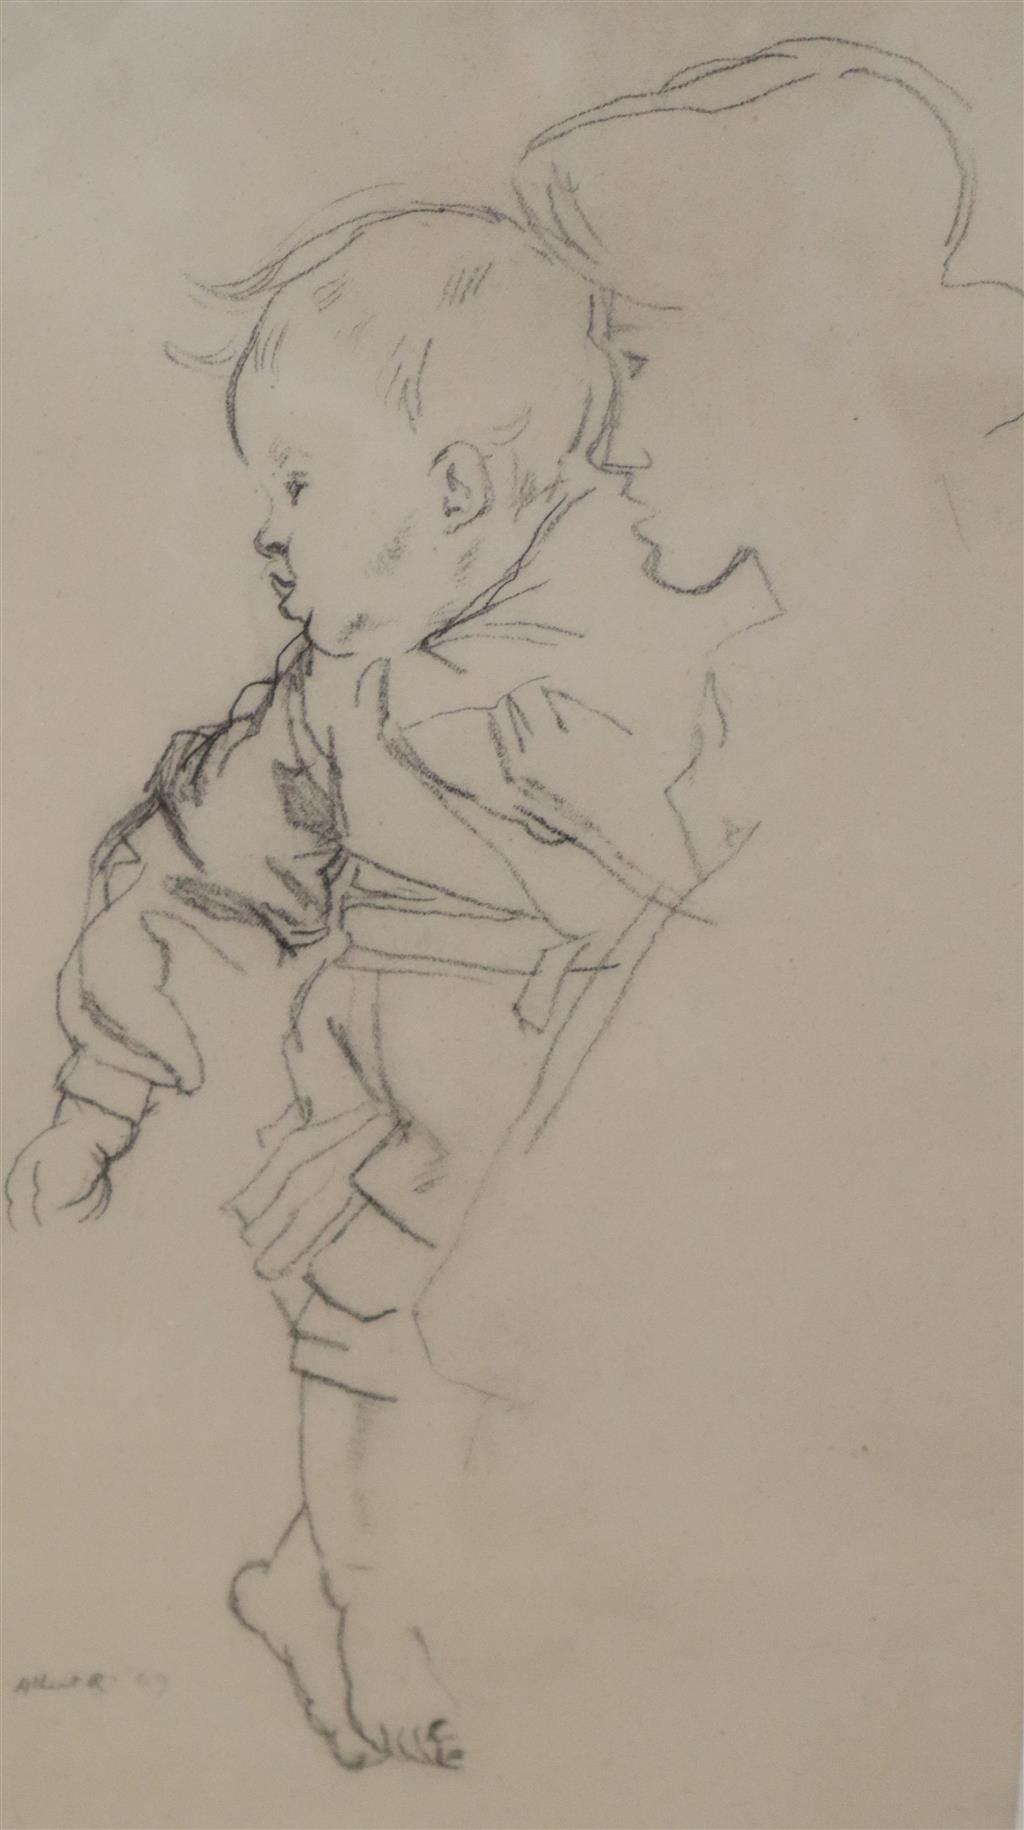 Albert R., pencil on paper, Study of a Japanese mother and child, signed and dated 09, 32 x 17.5cm